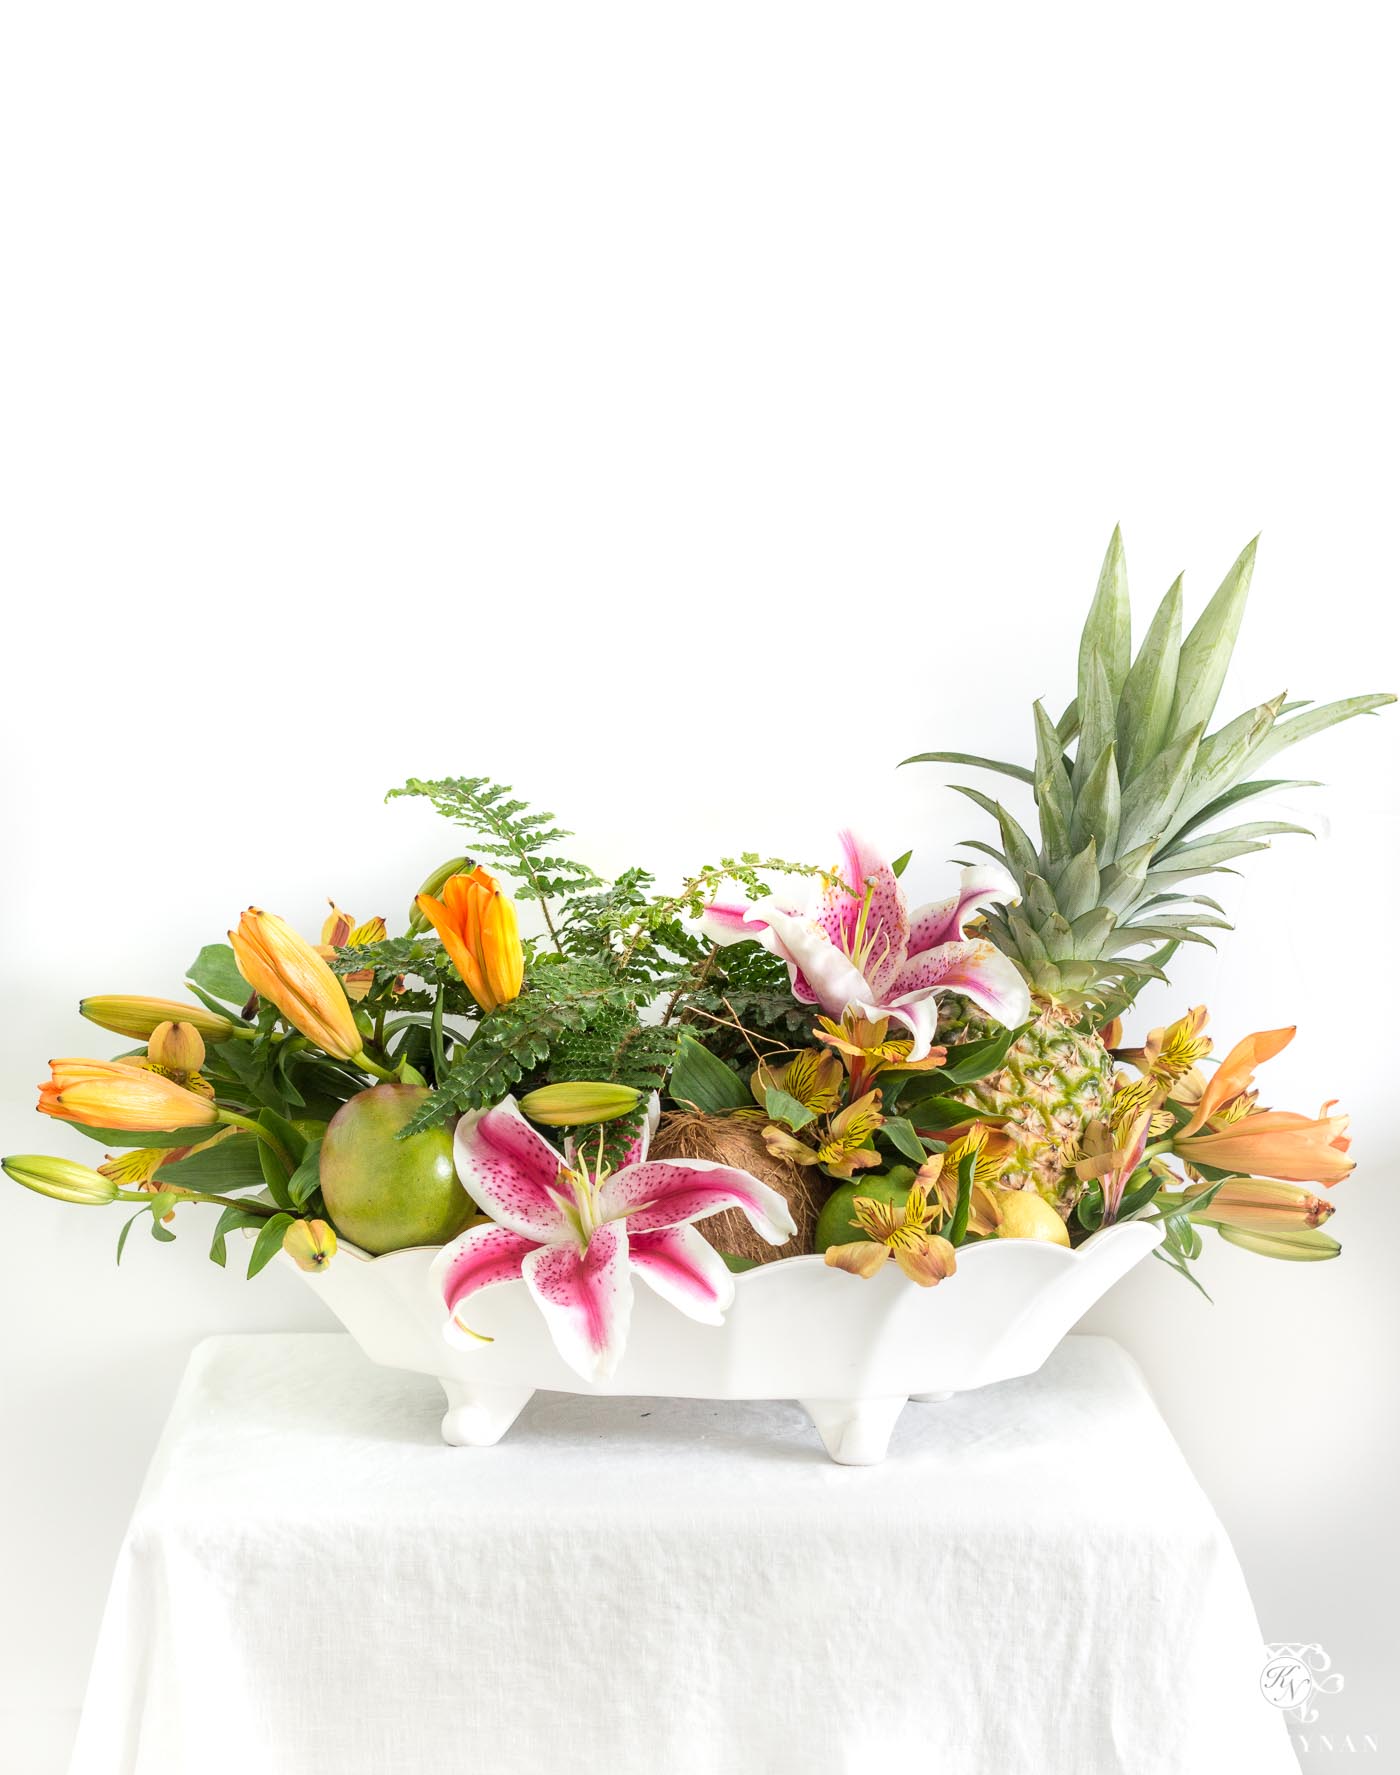 Tropical centerpiece idea with flowers and fruit